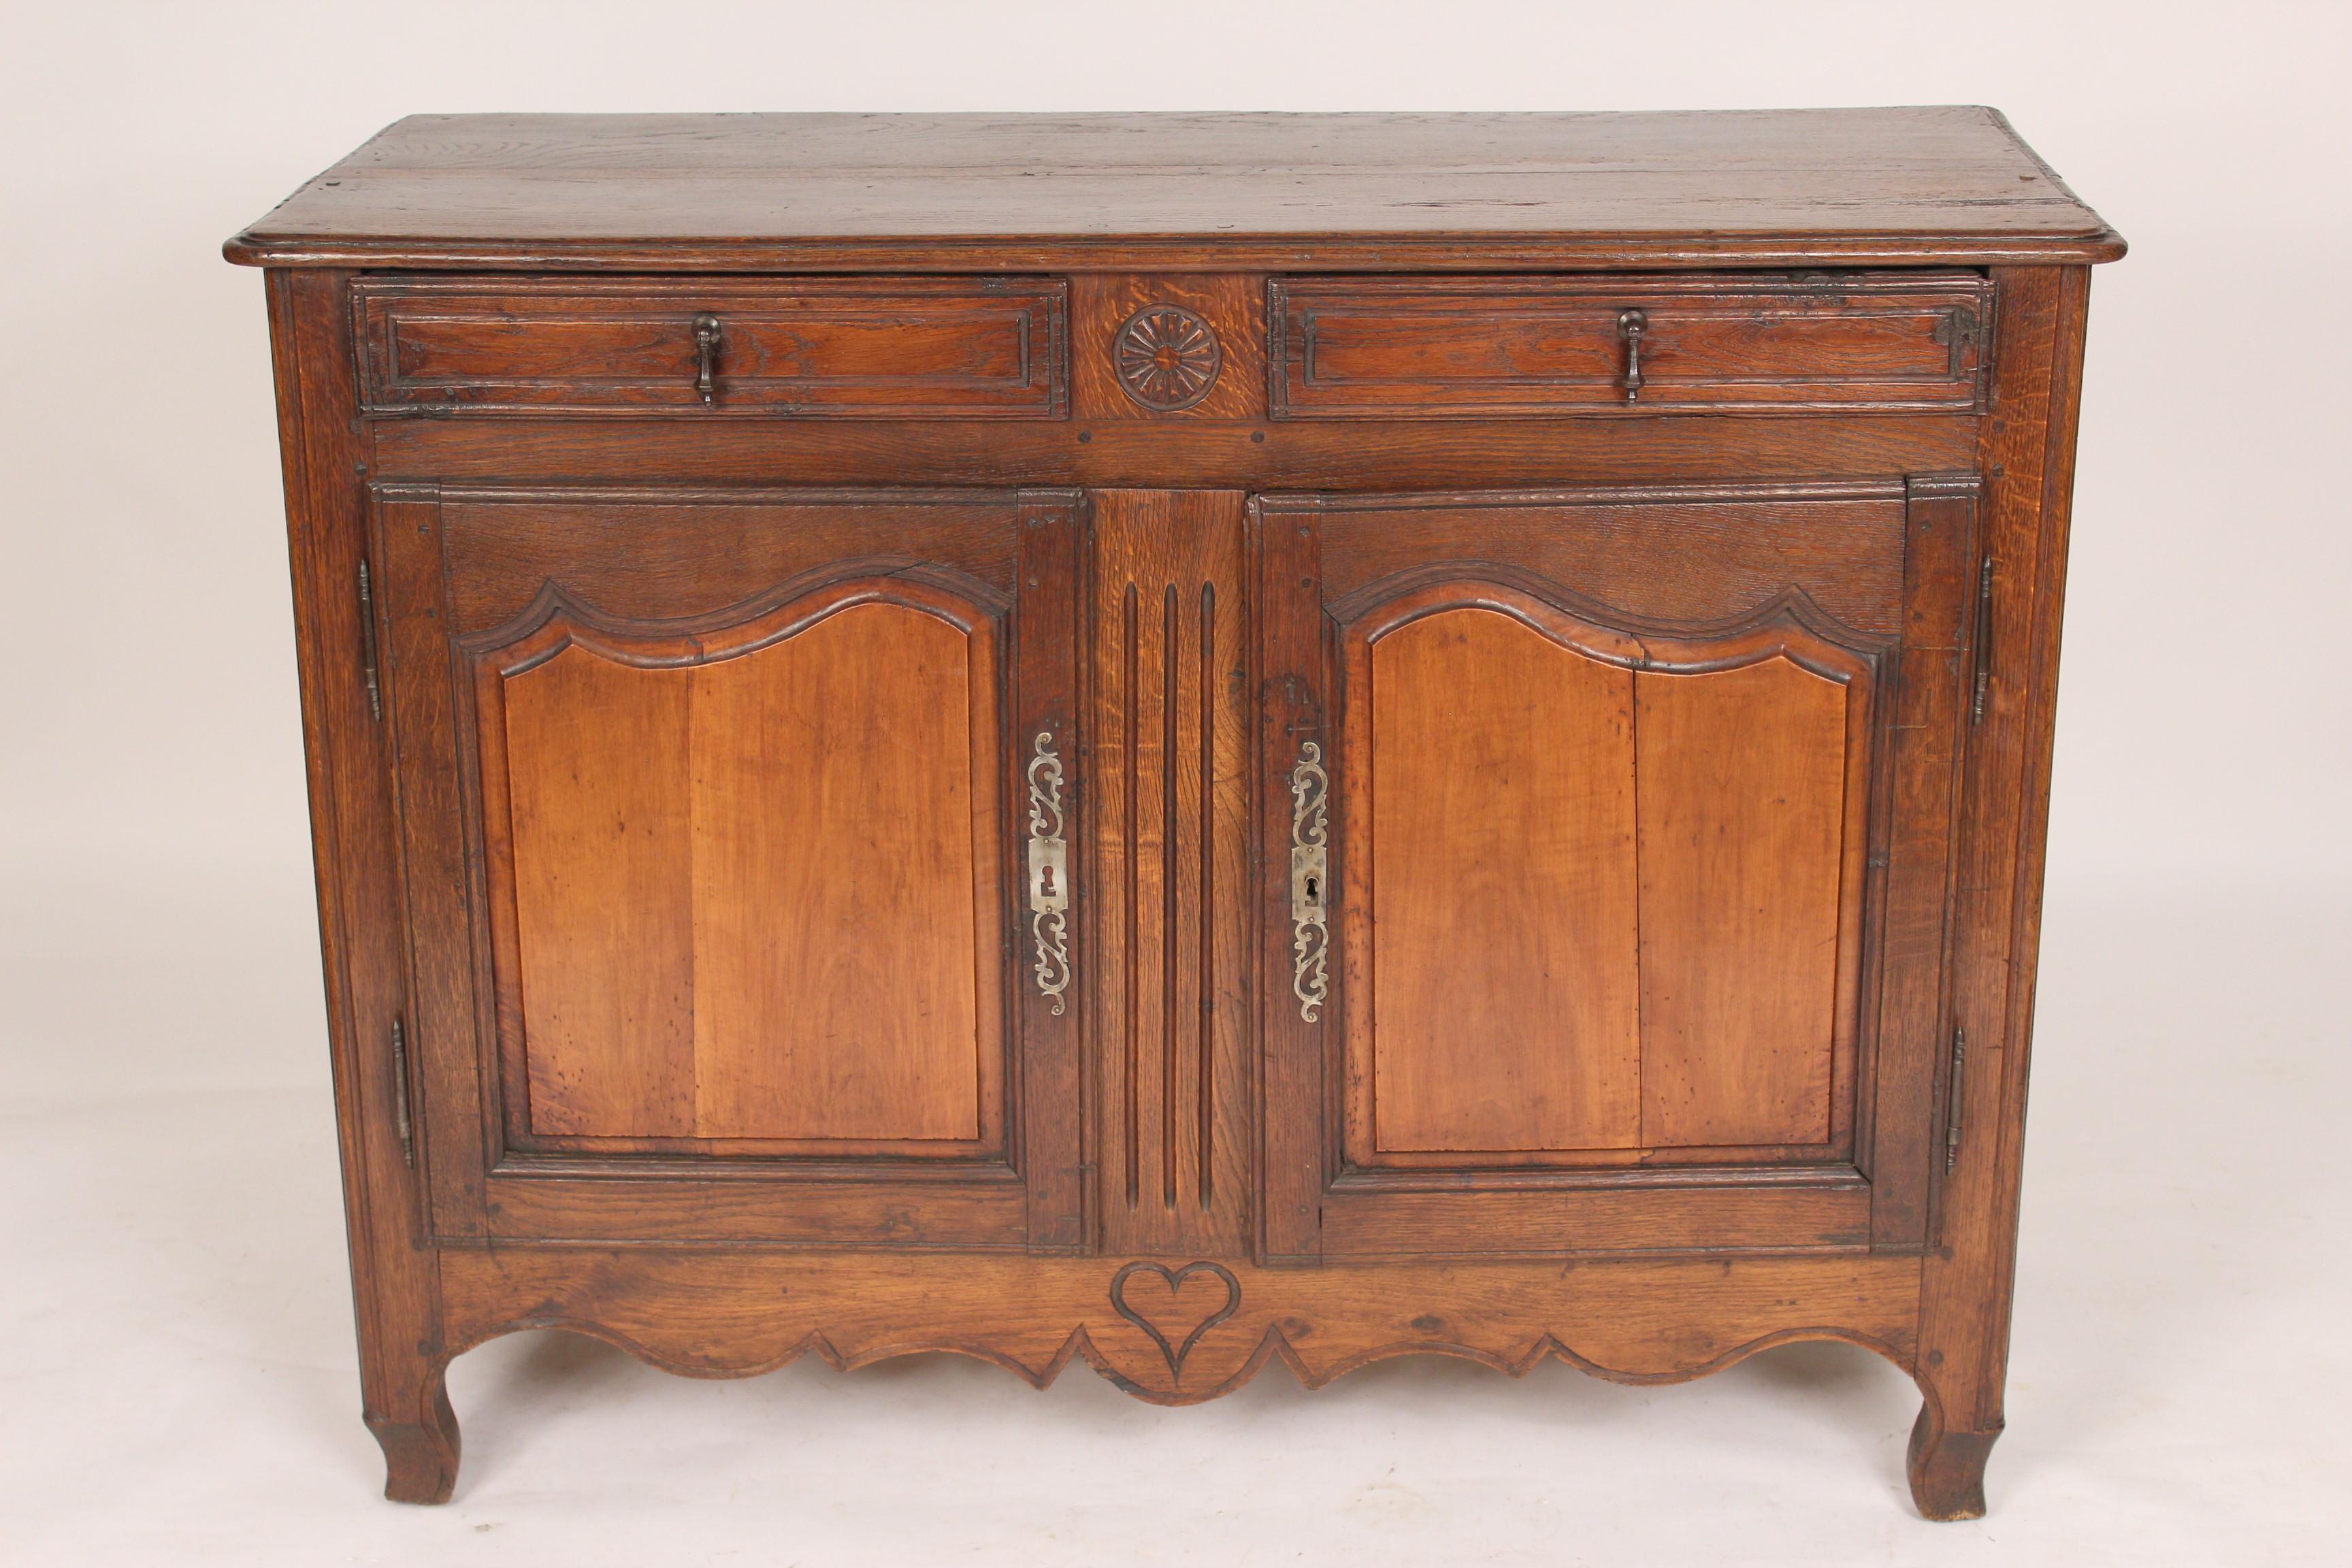 Antique Louis XV style provincial oak buffet with beech wood paneled doors, 19th century.